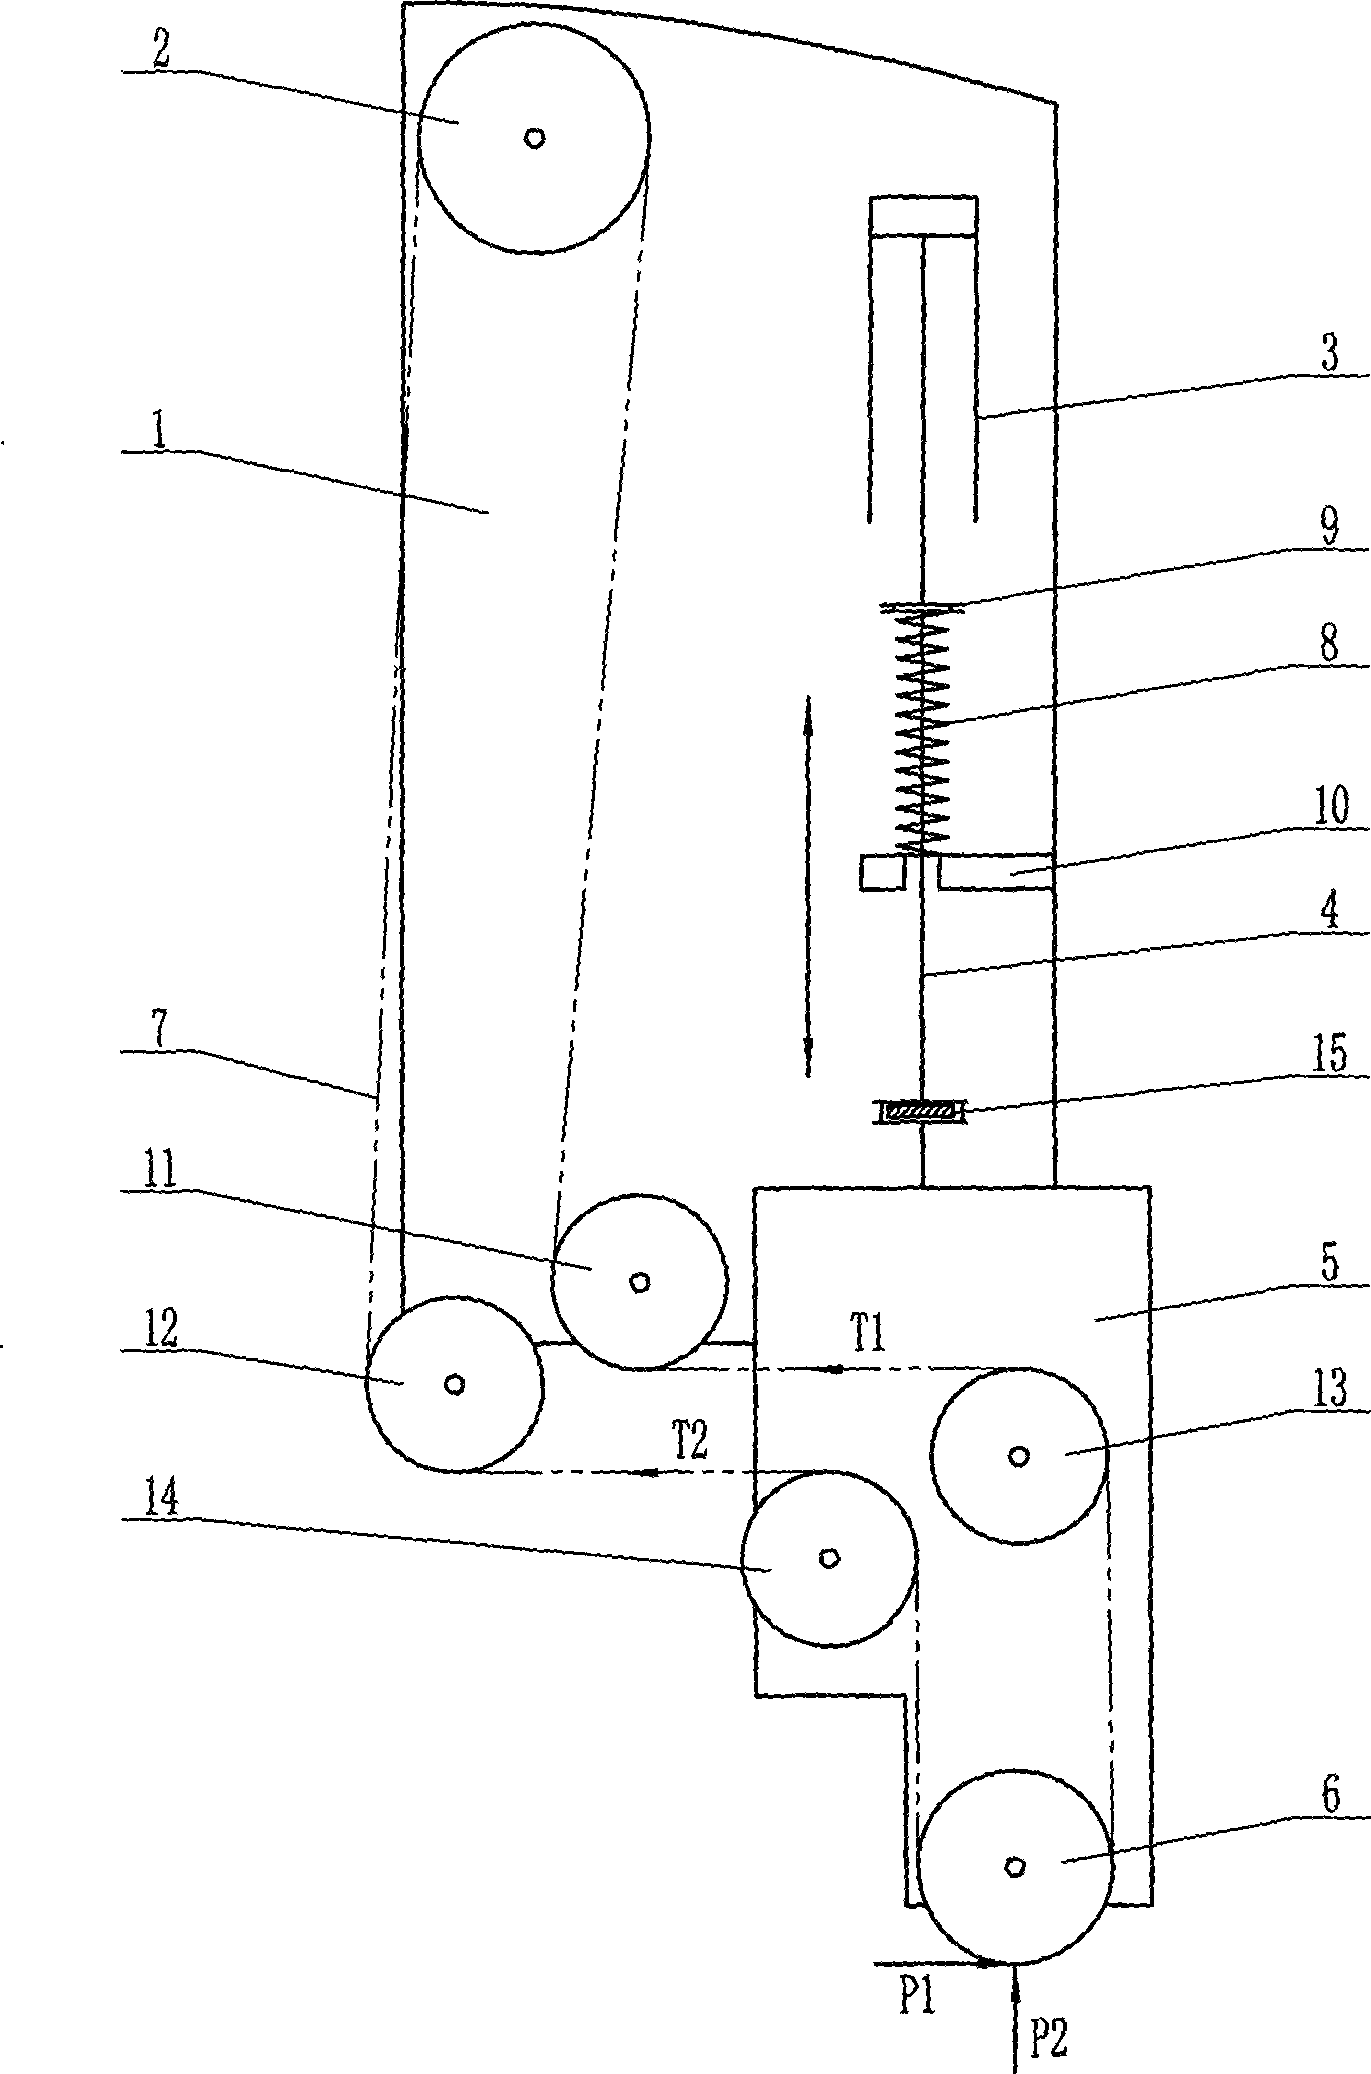 Floating belt grinding device with feed back and adjustable pressure